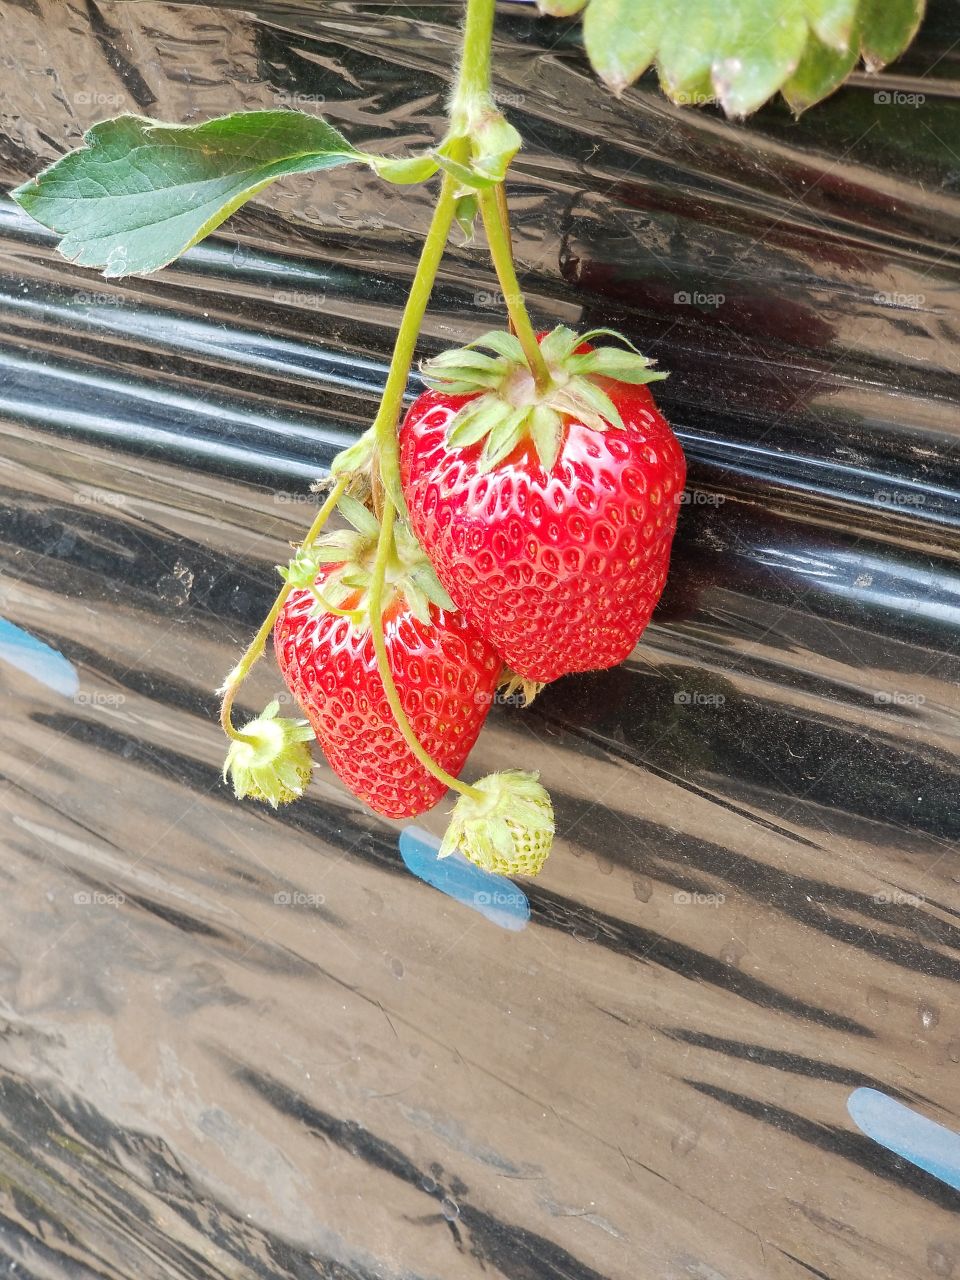 delicious looking strawberry